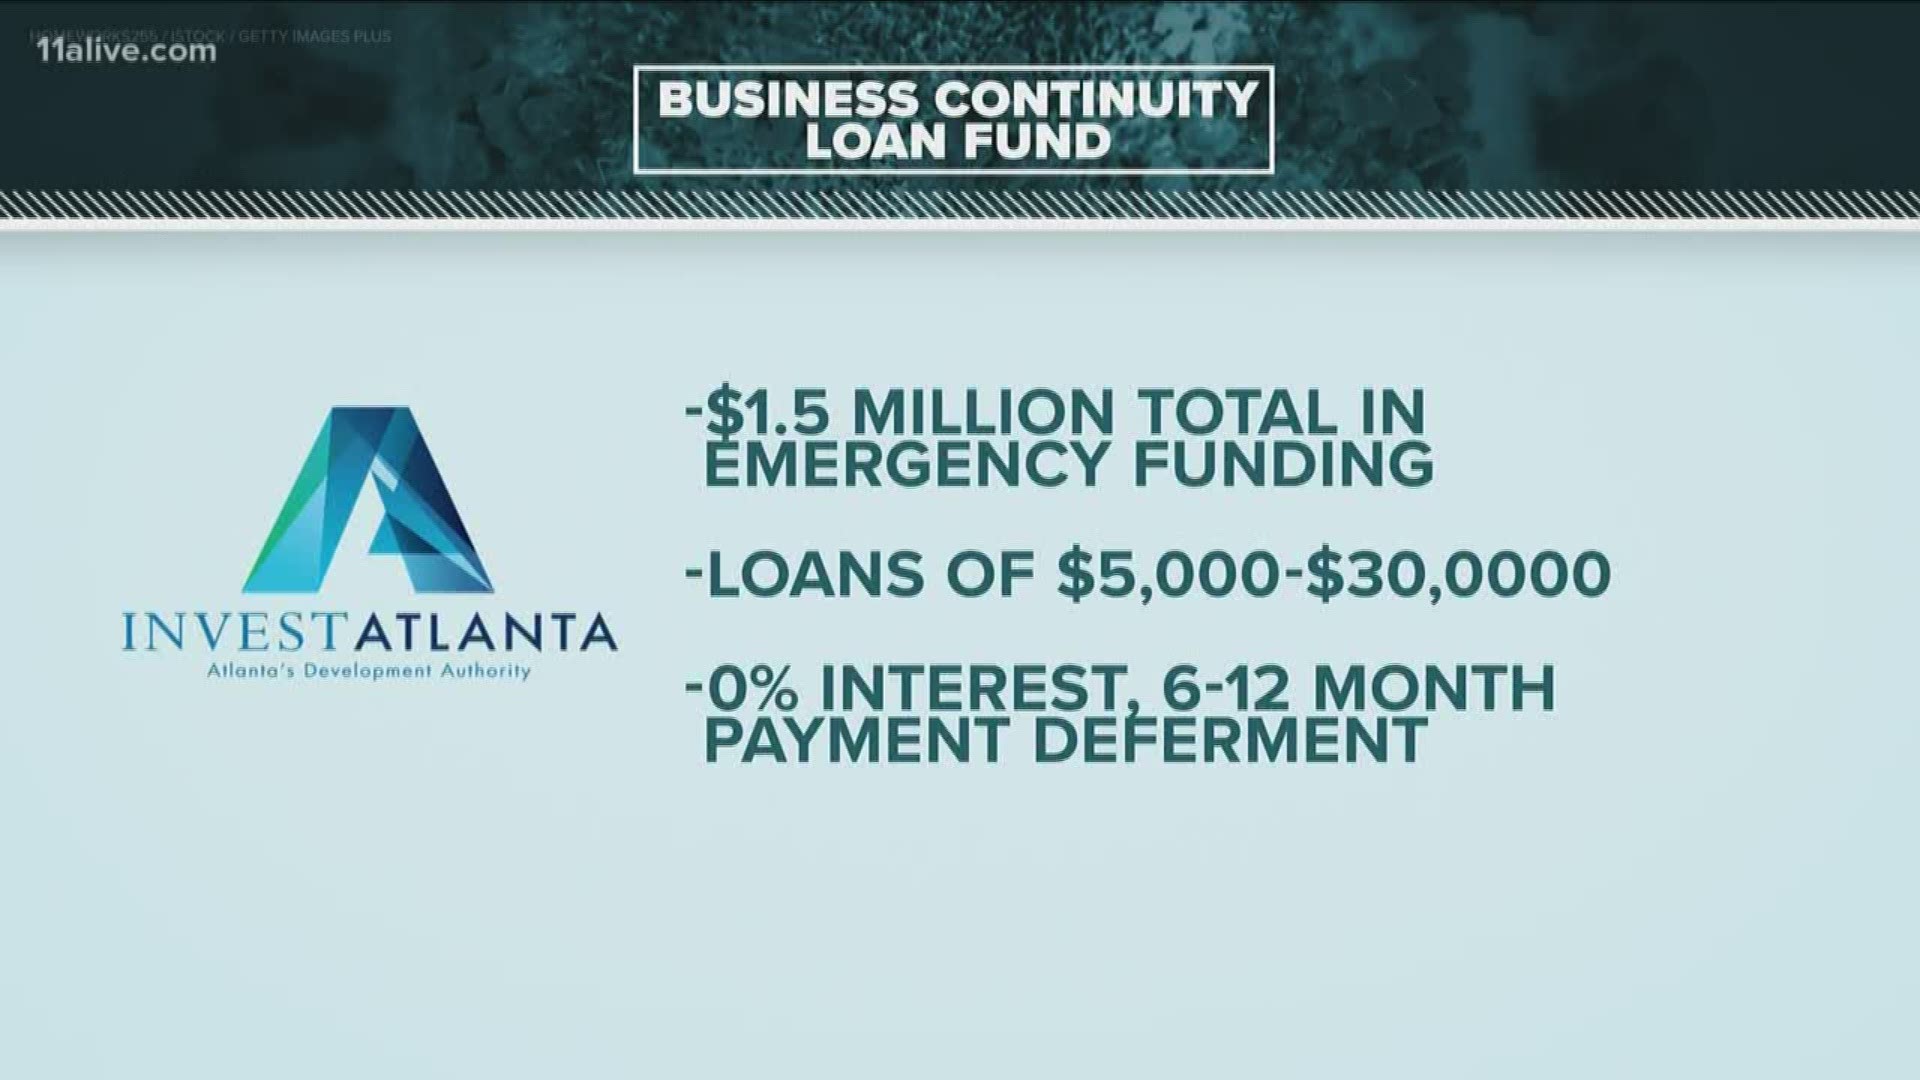 Loan applications are piling up on the local and federal level from small business owners struggling to pay rent, salaries and other expenses